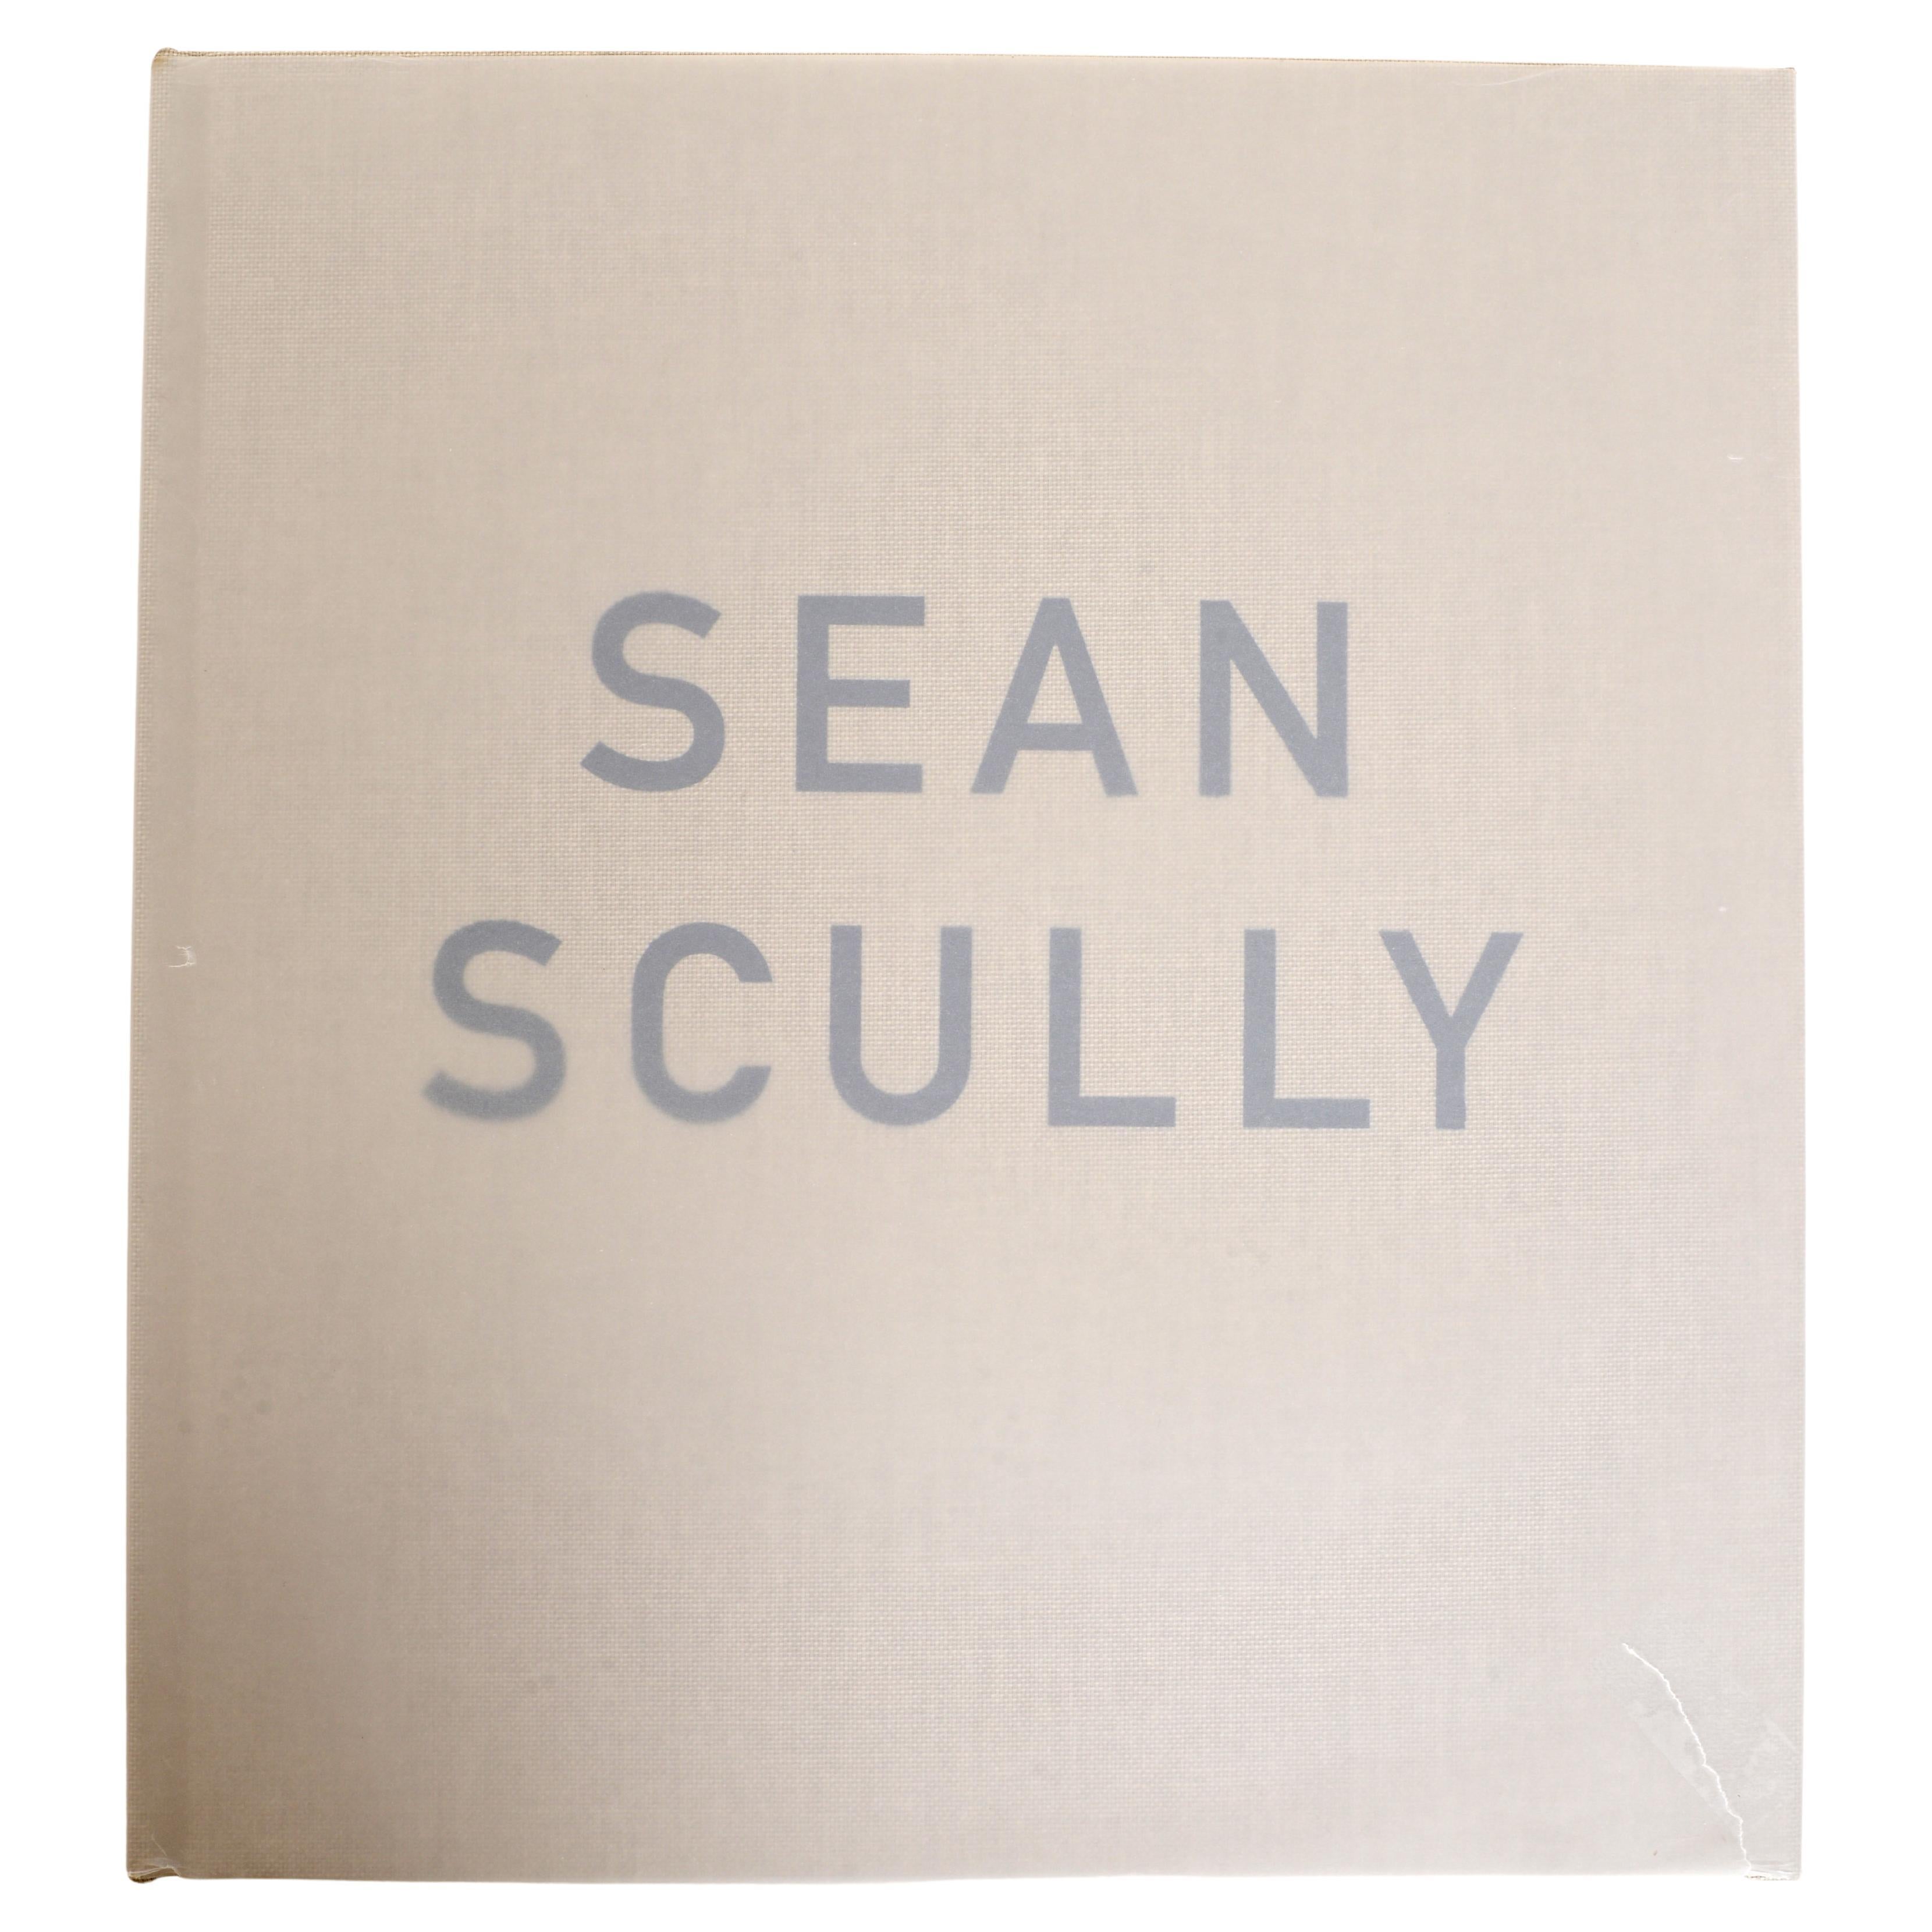 Sean Scully Night and Day by Sean Scully & John Yau, 1st Ed Exhibition Catalog